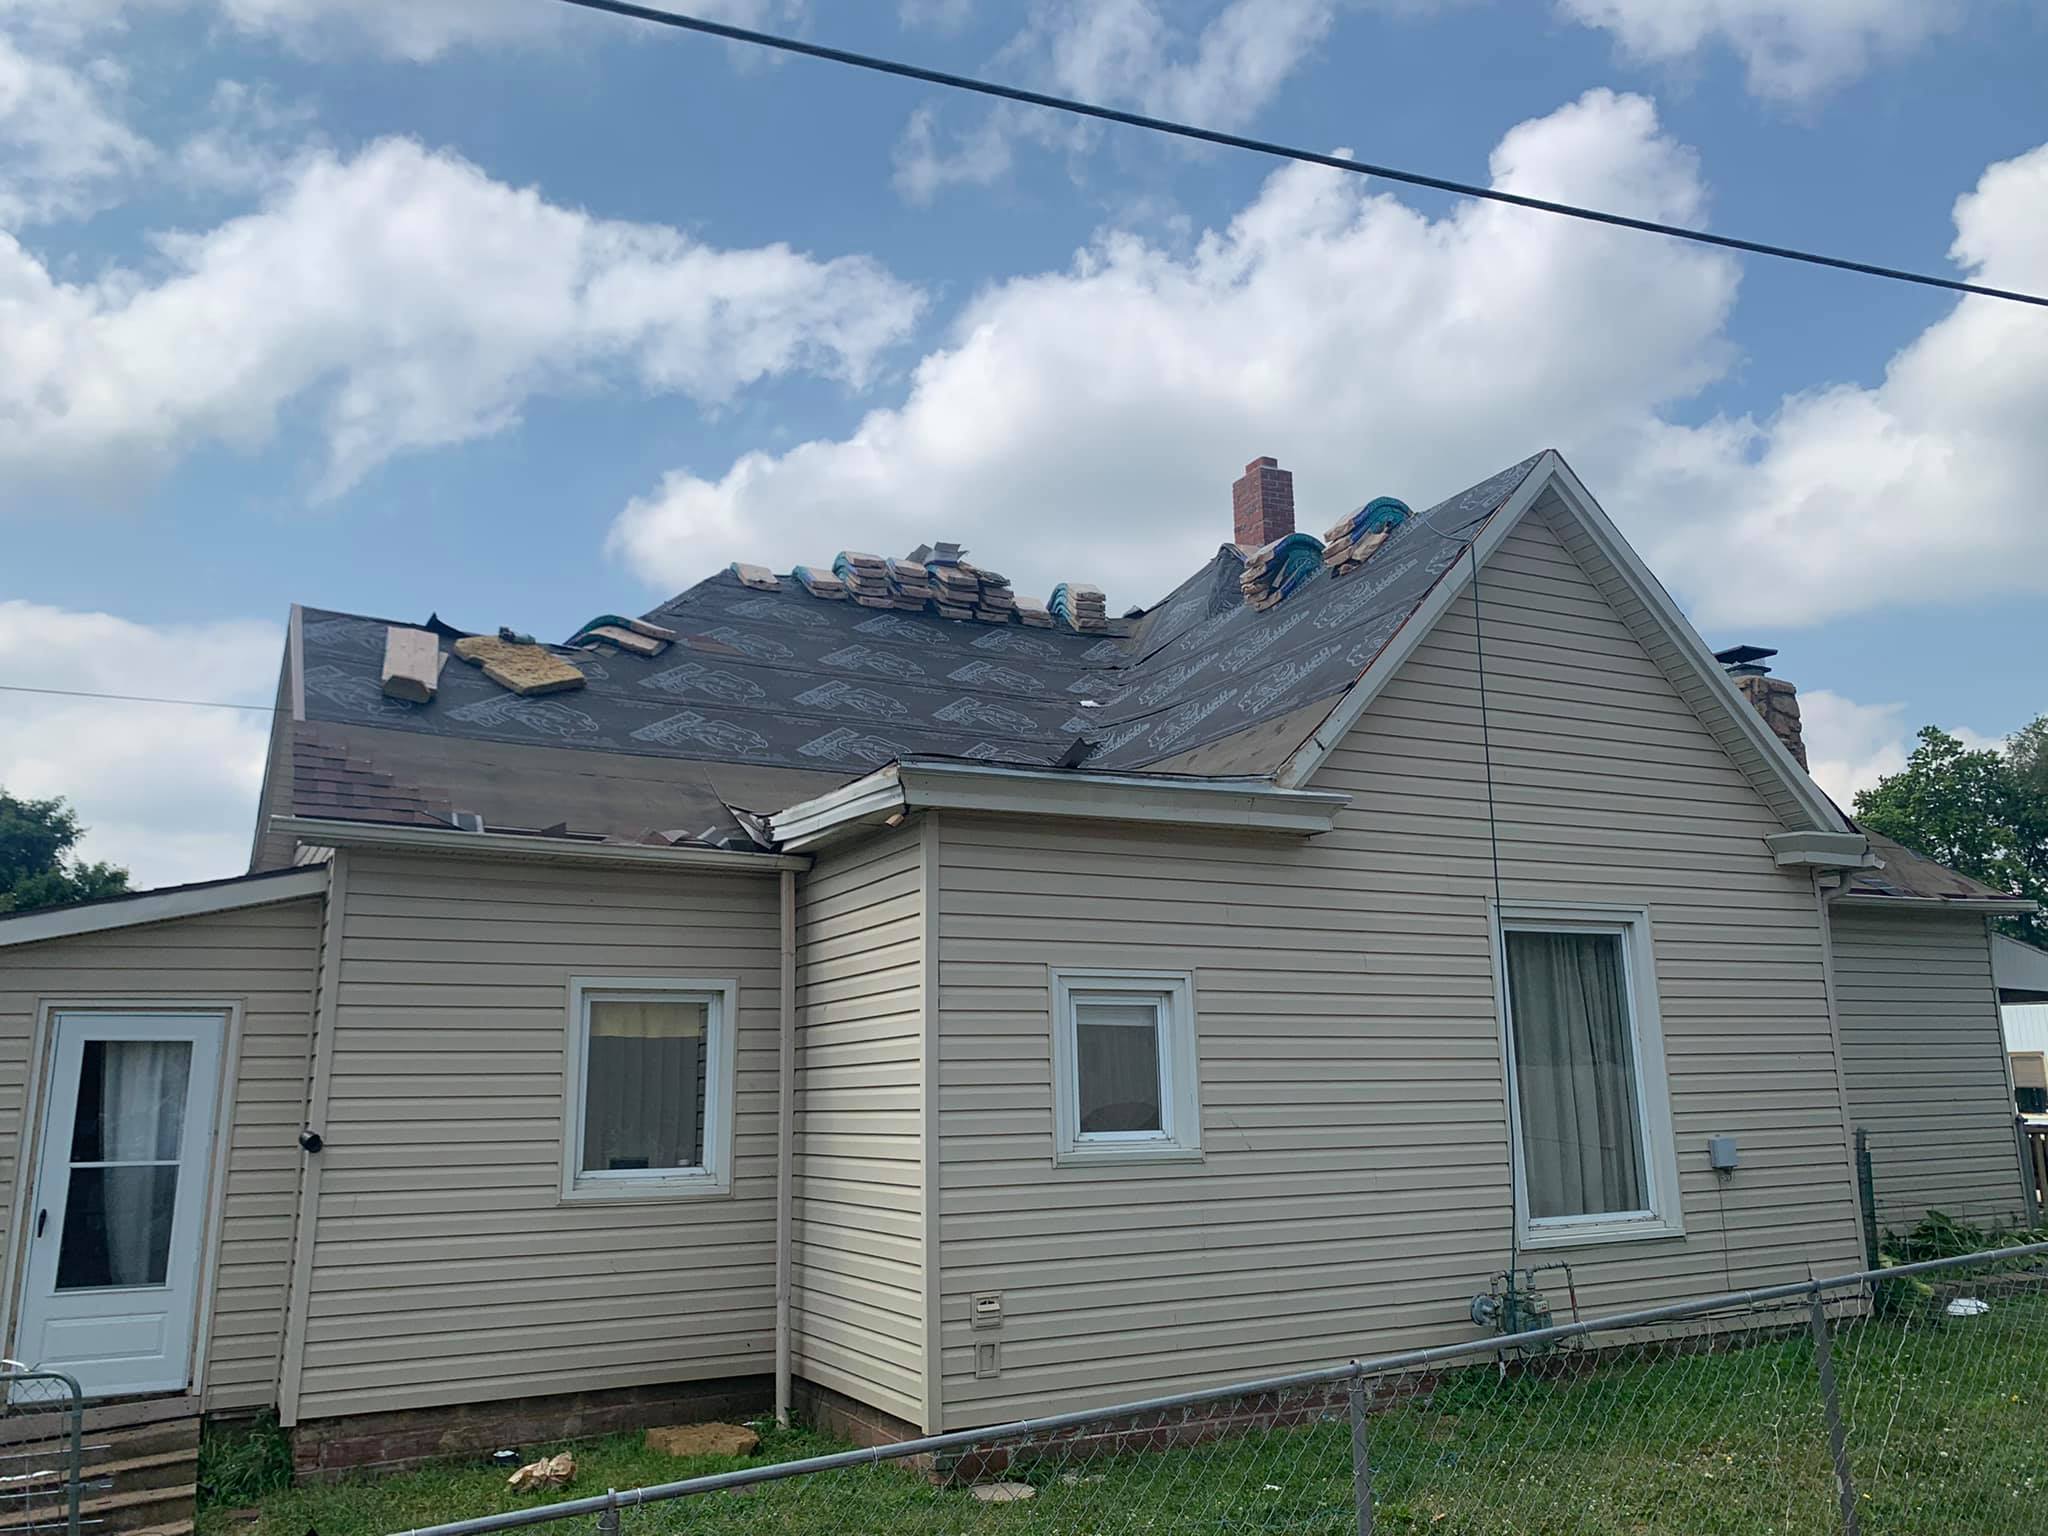 Roofing Companies Near Maryville Missouri - Tips For Finding Great